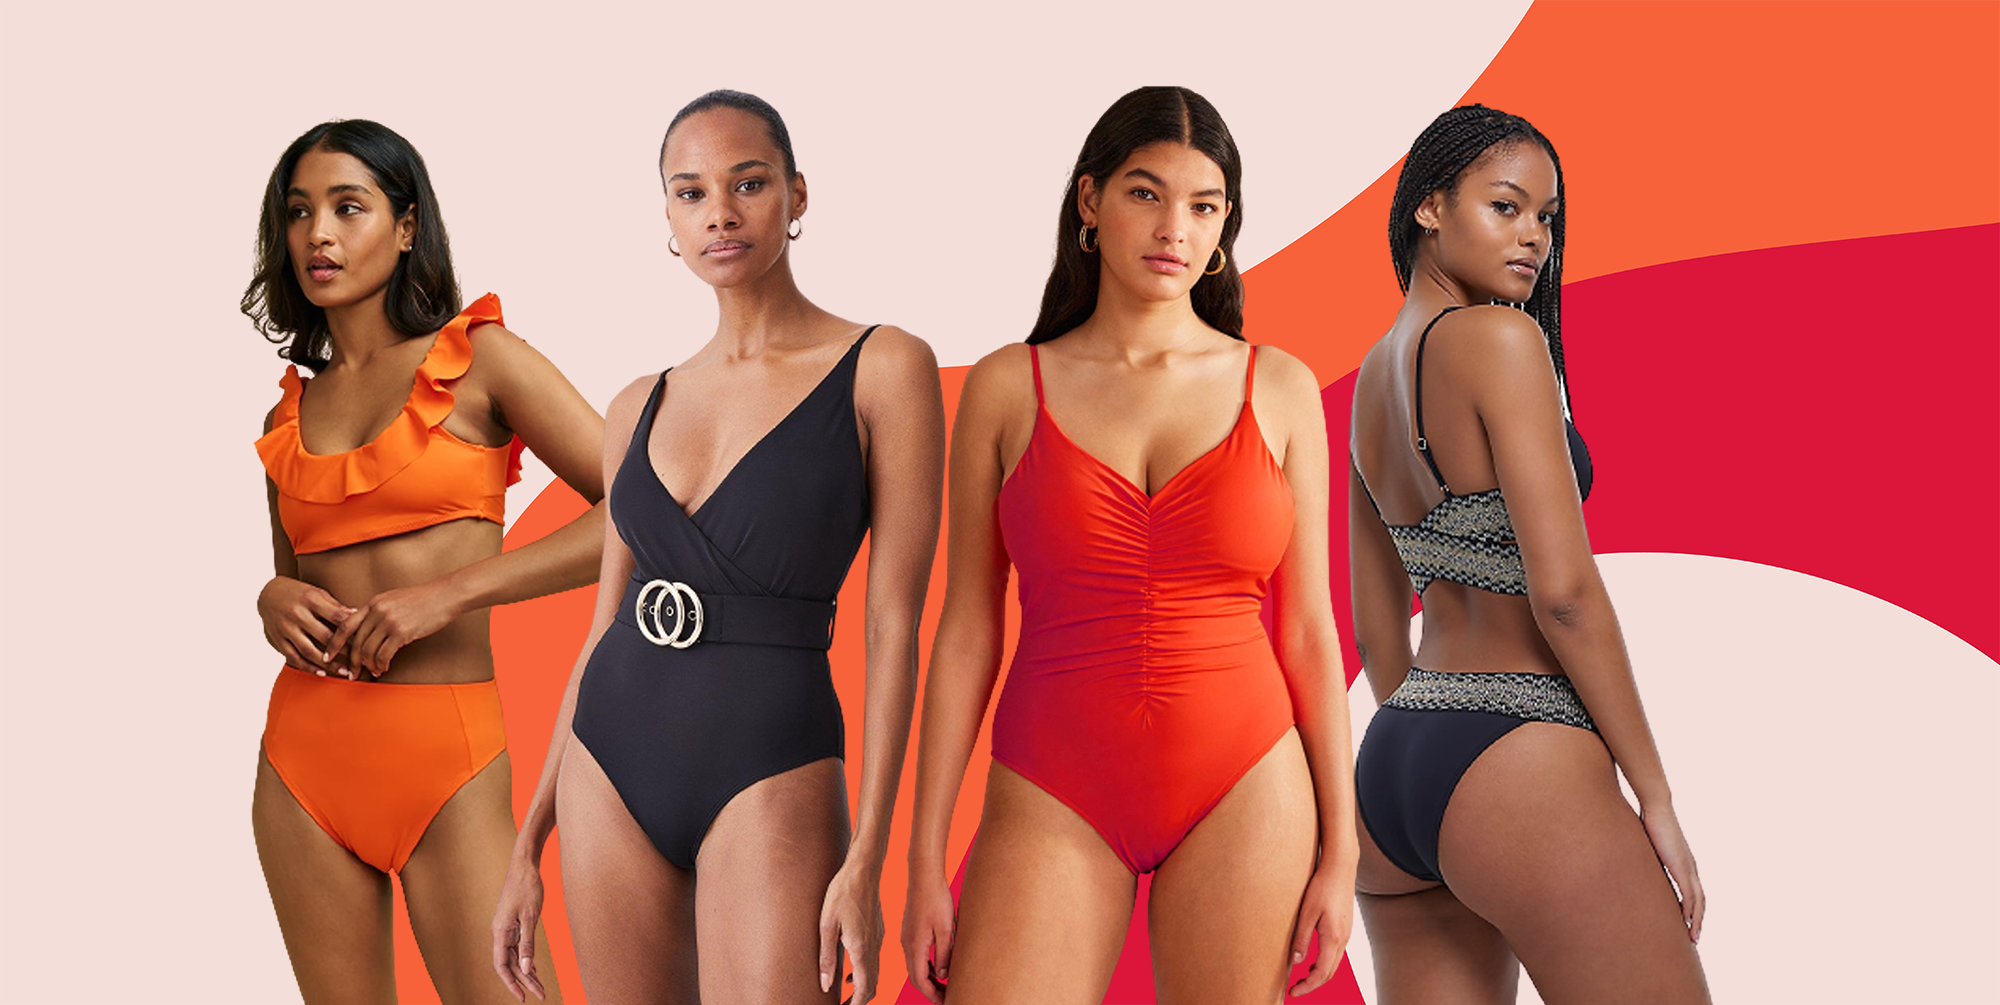 The Best Bathing Suits for Your Body Type and Budget  Bathing suits body  types, Bathing suit body, Swimsuit for body type